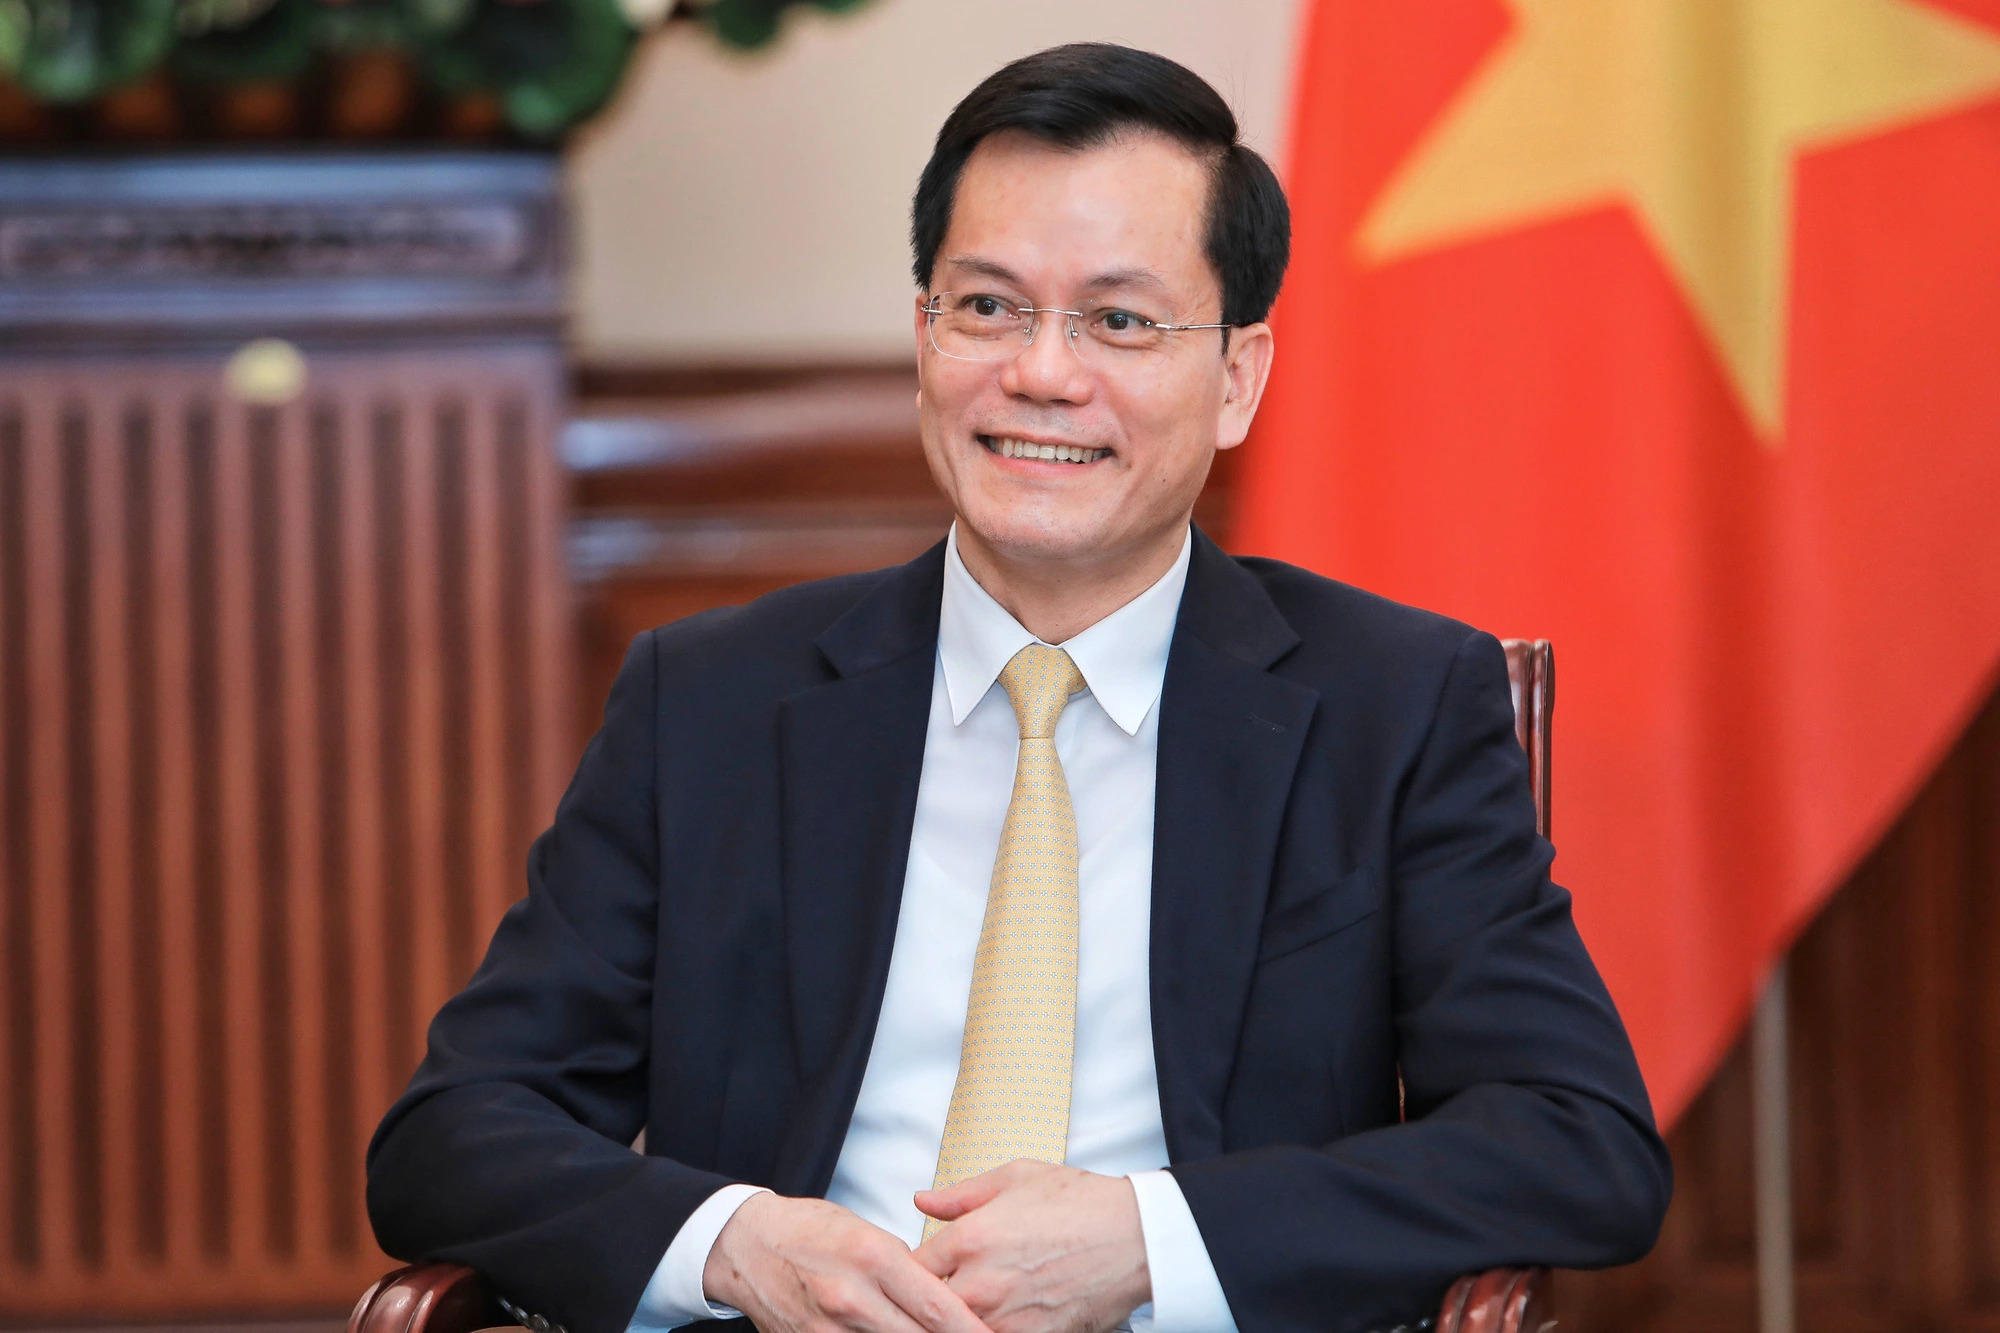 US attaches great importance to role of Vietnam’s Communist Party and its leader: Vietnamese Deputy FM